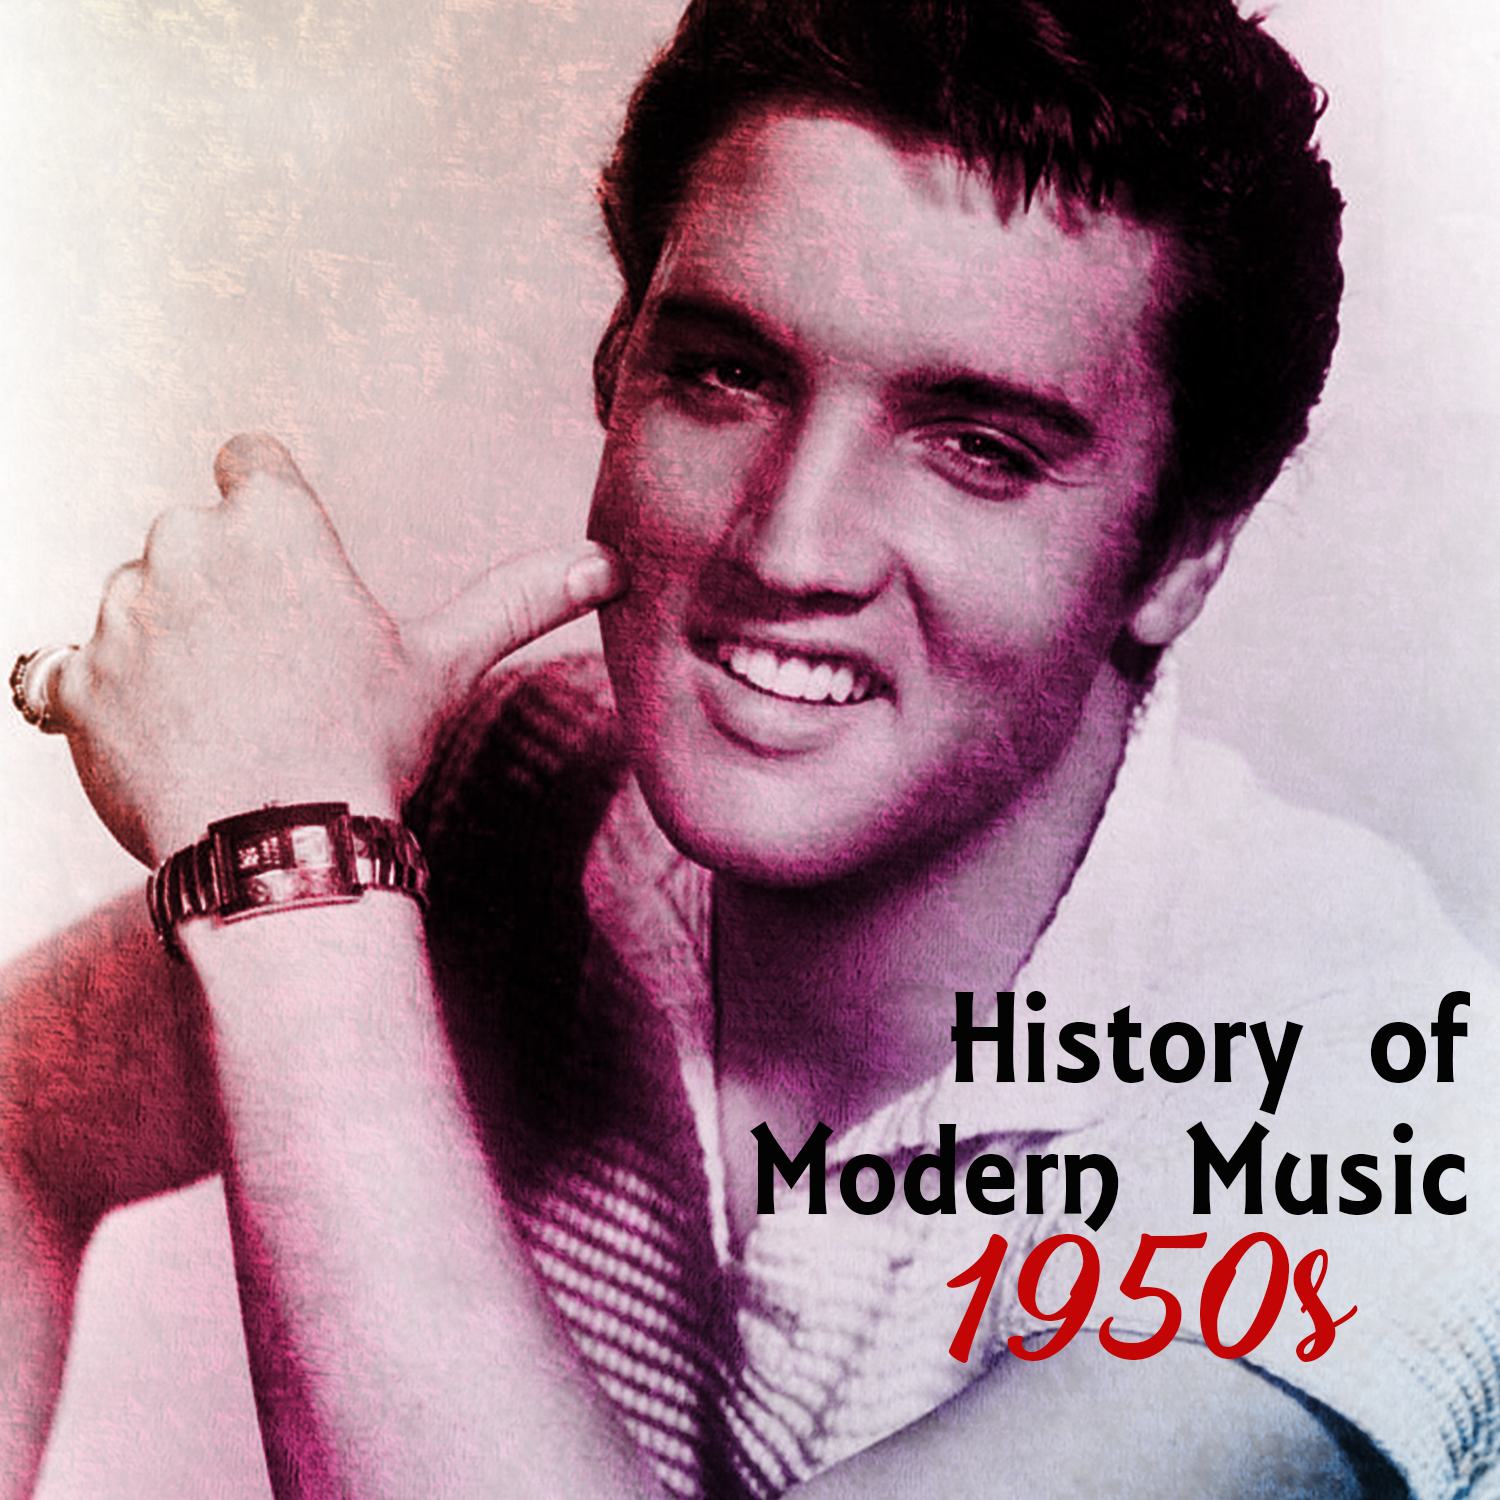 a history of modern music